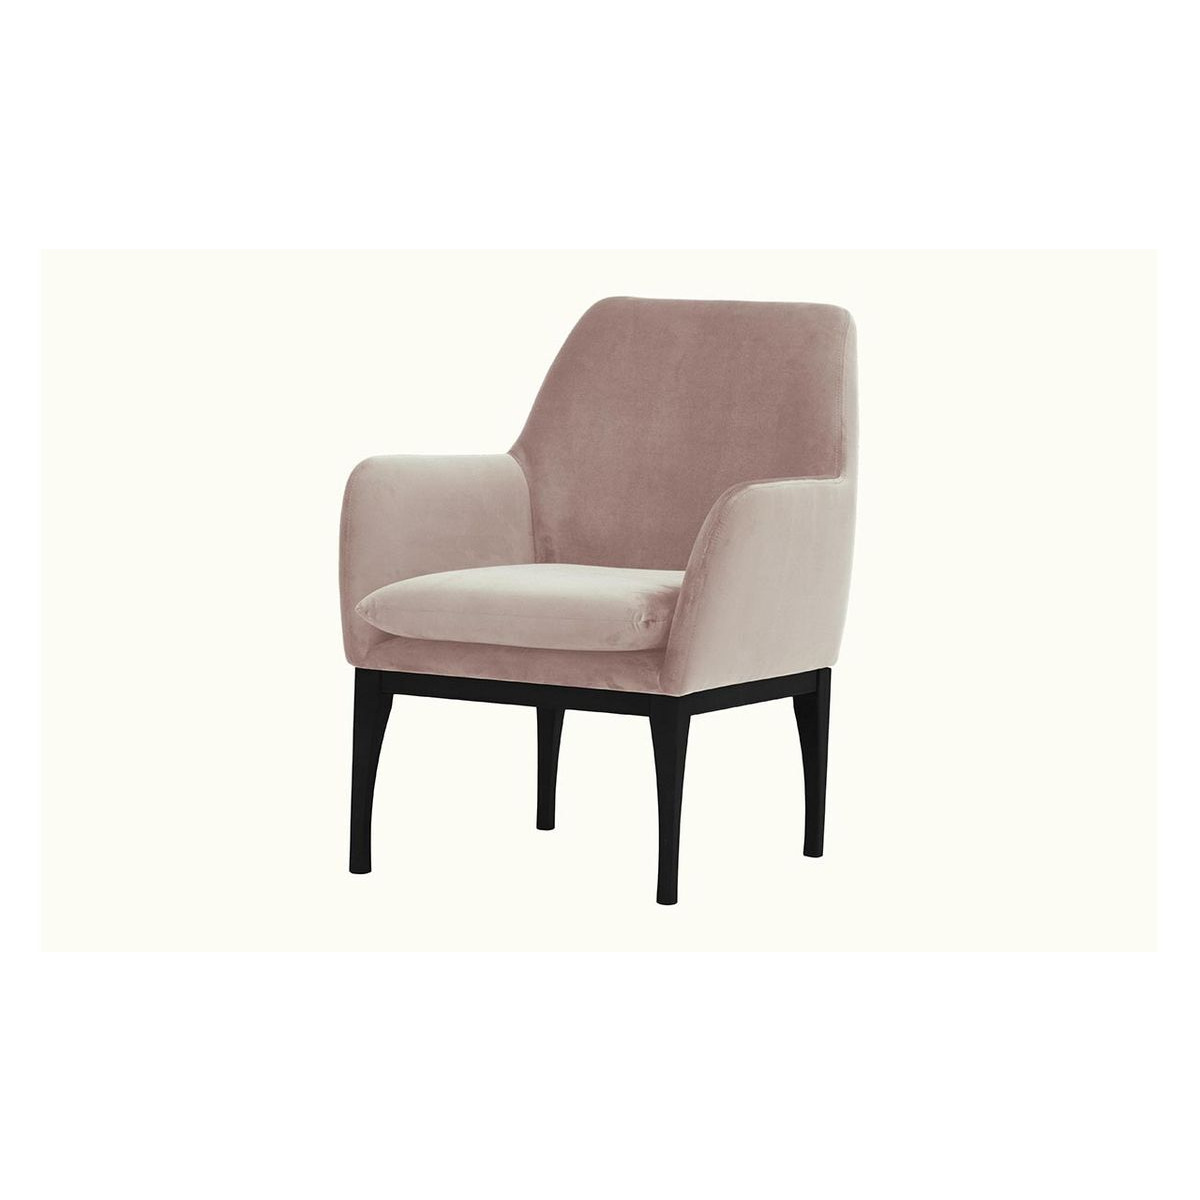 Beca Armchair with Wooden Legs, lilac, Leg colour: black - image 1